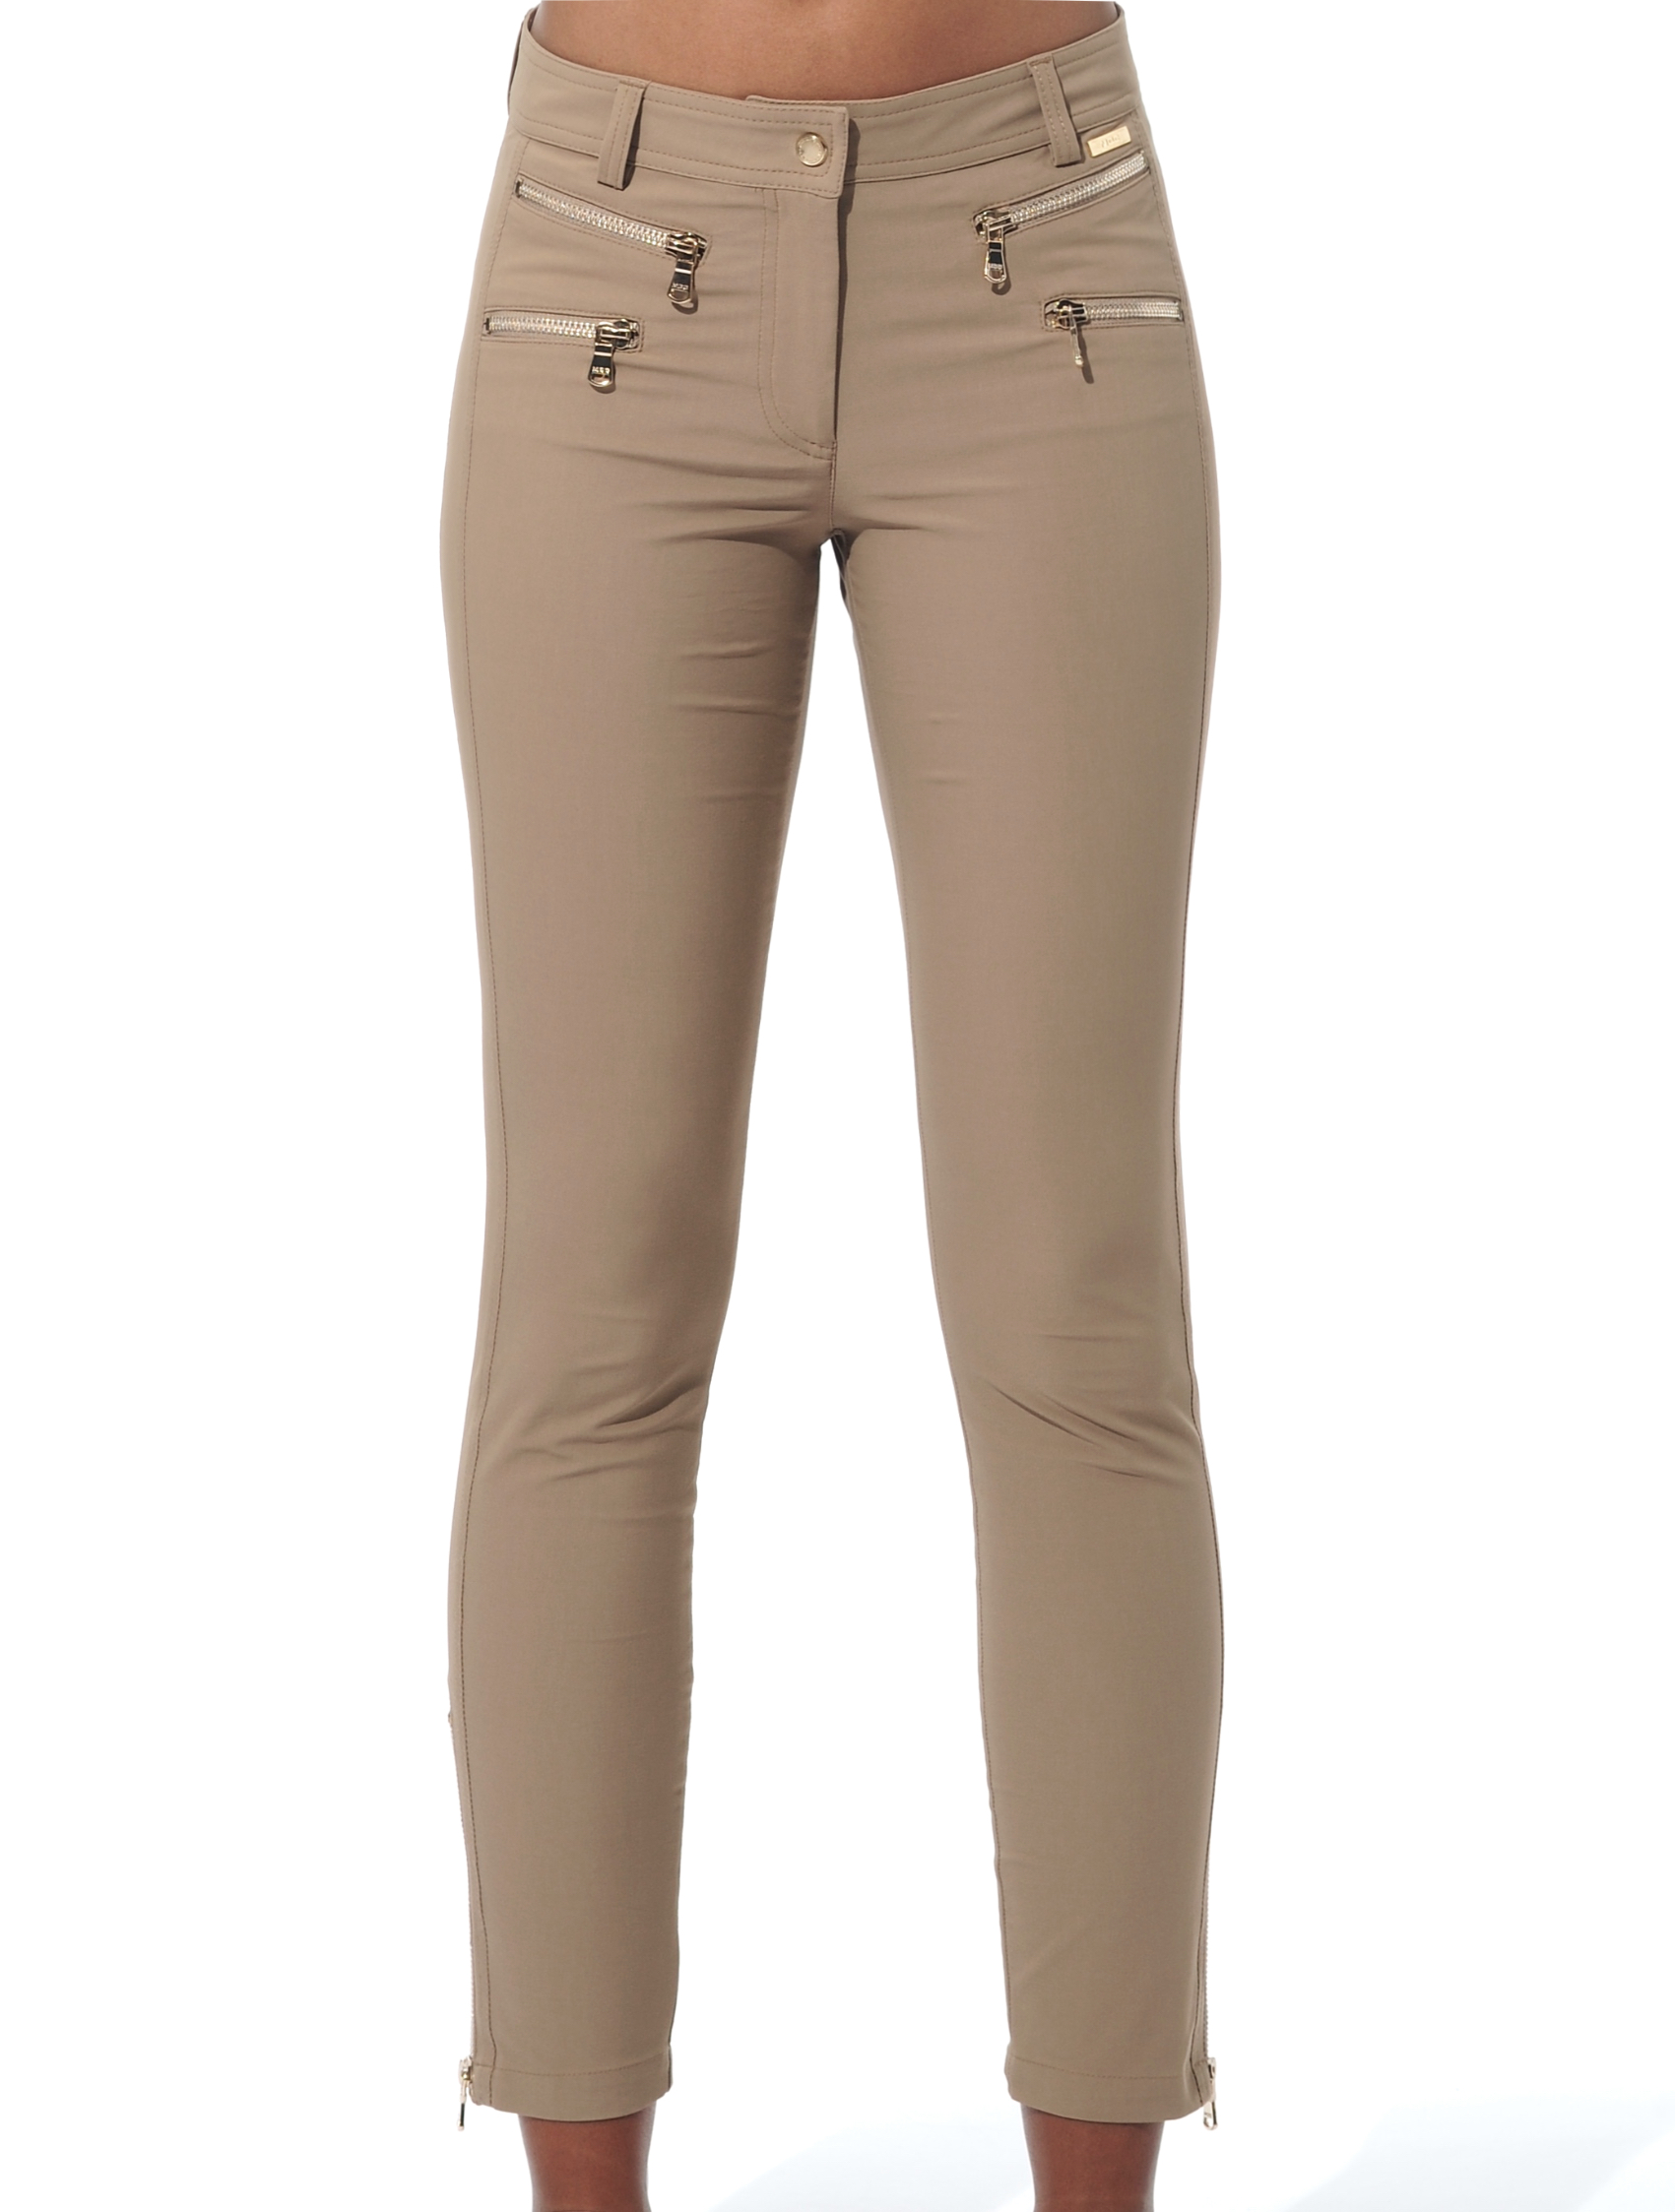 4way stretch double zip ankle pants chestnut 